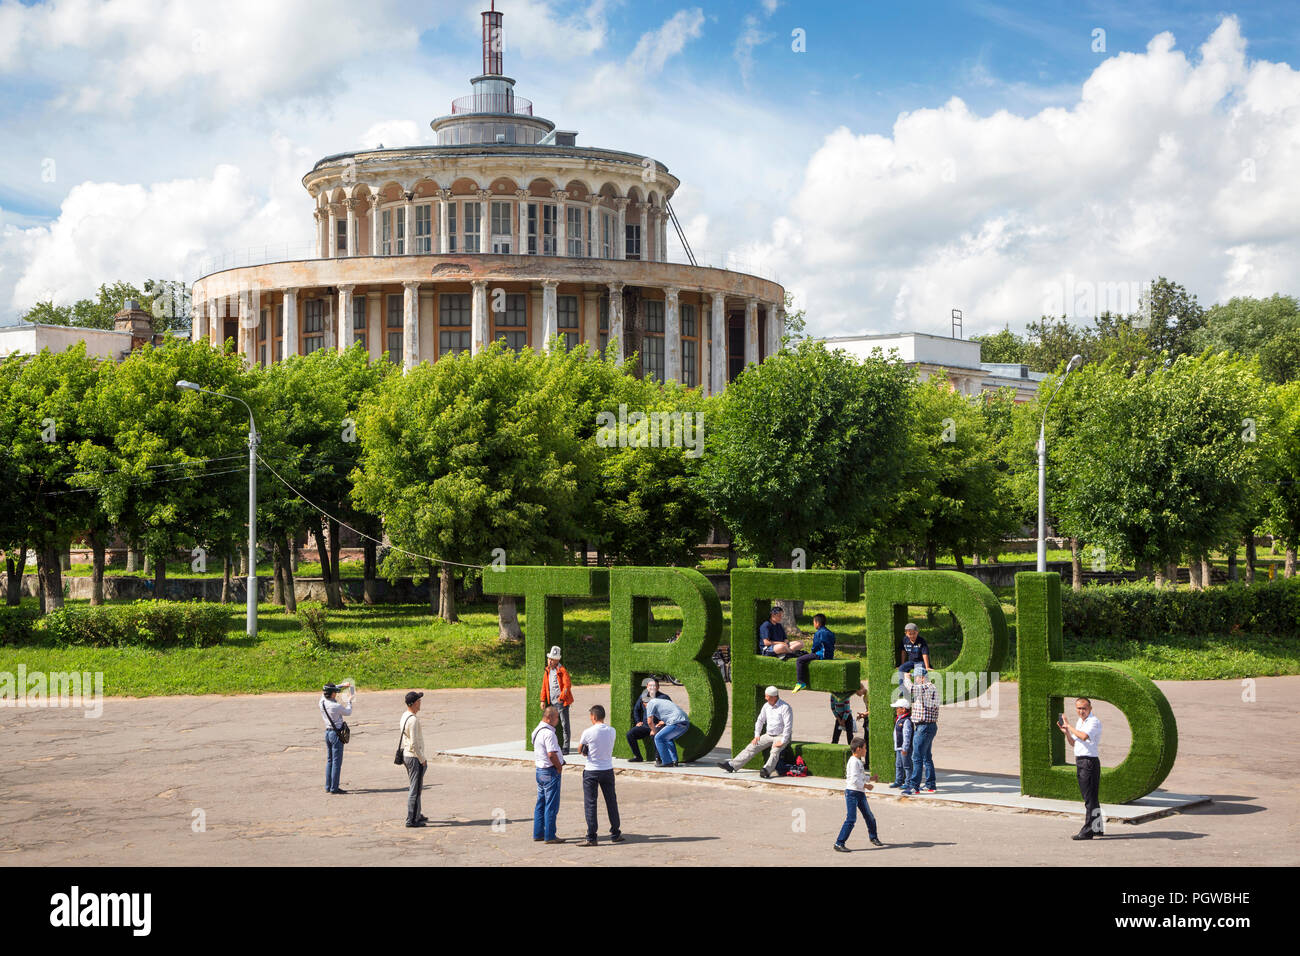 People make a photos near an inscription 'Tver' near the River Station building on a waterfront Afanasy Nikitin in the center of Tver town, Russia Stock Photo